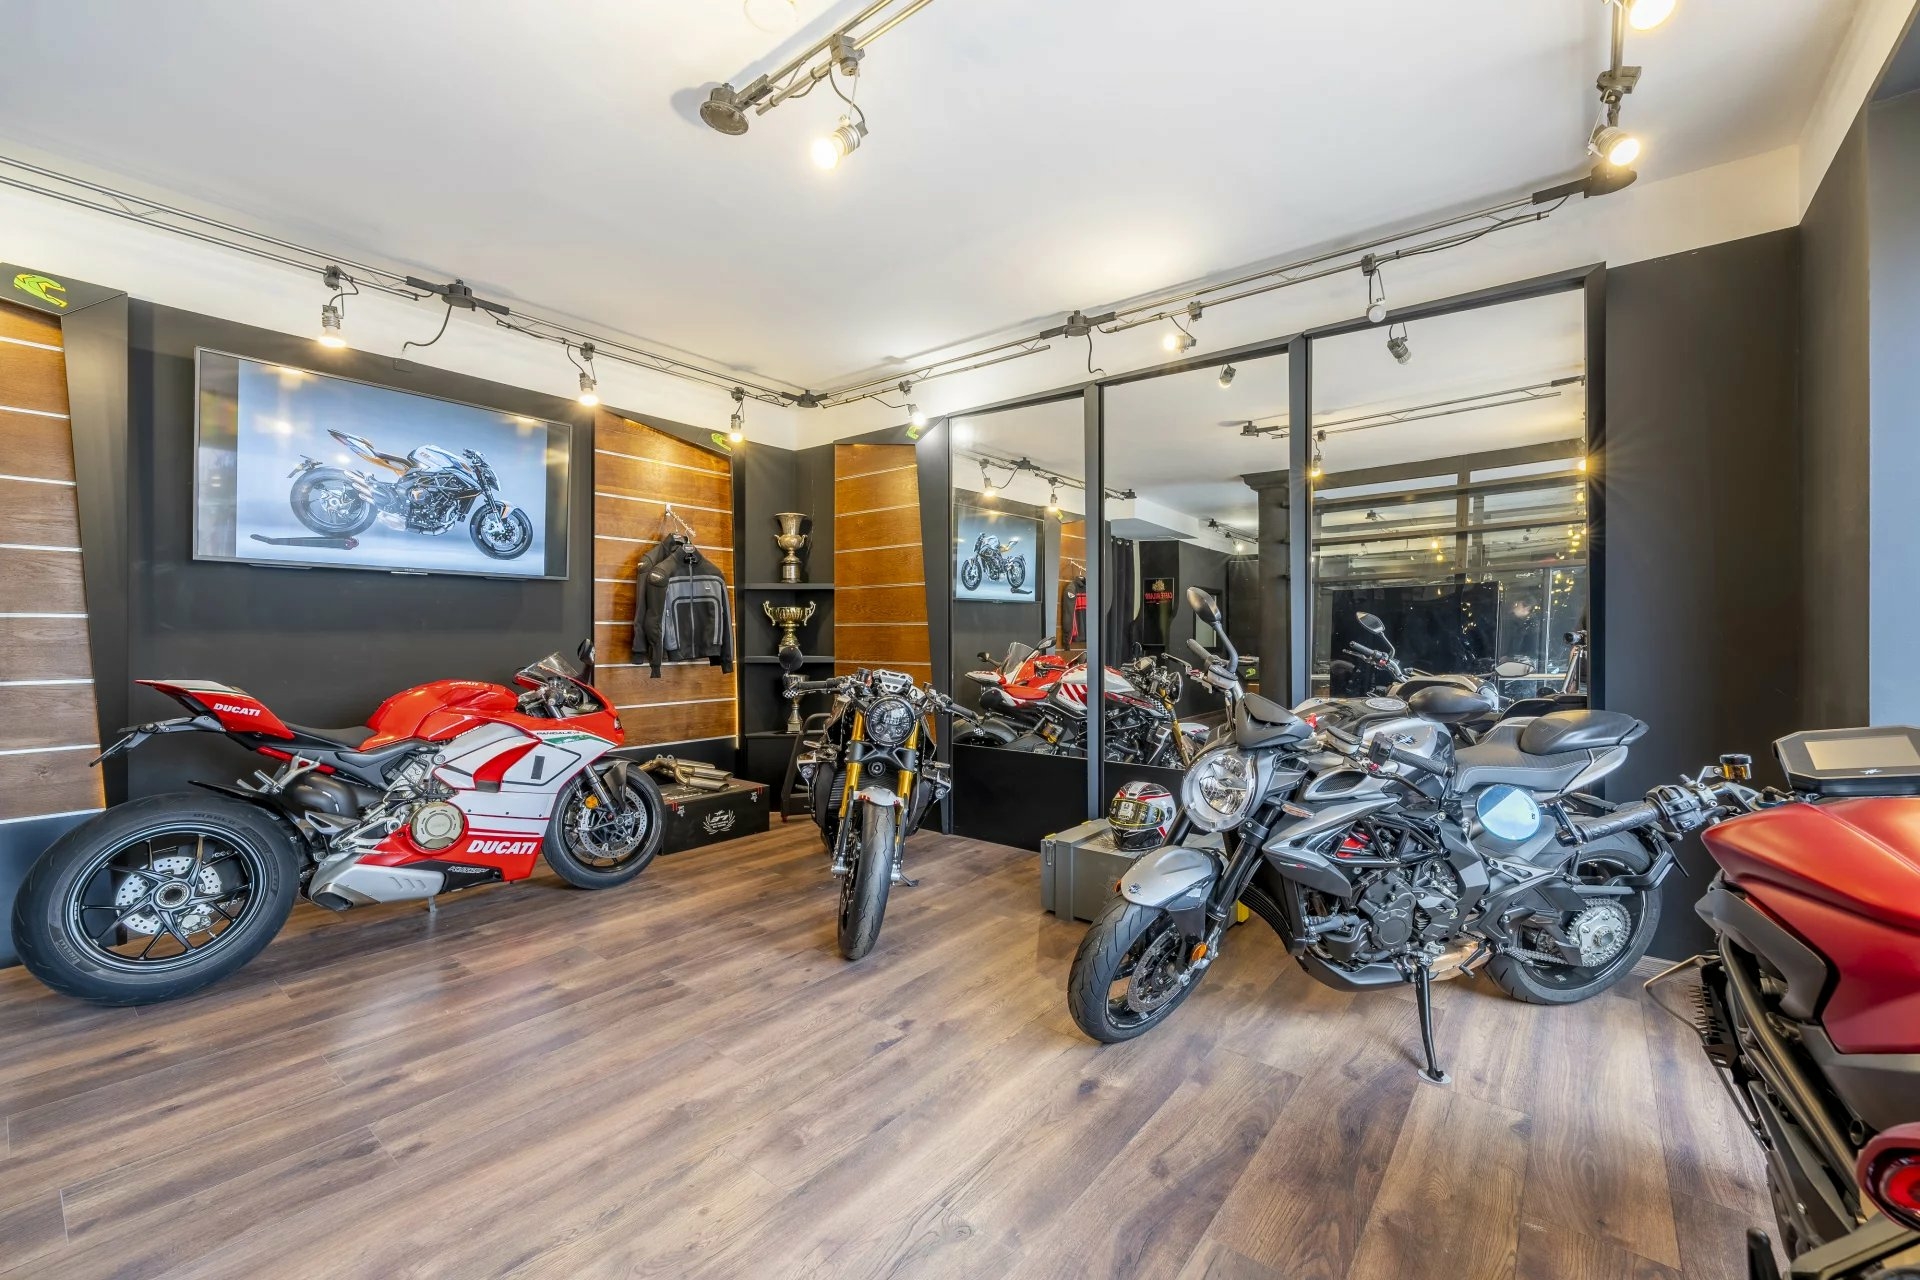 Exclusive - Condamine - Sale and repair workshop Motorcycles - Sales of commercial spaces